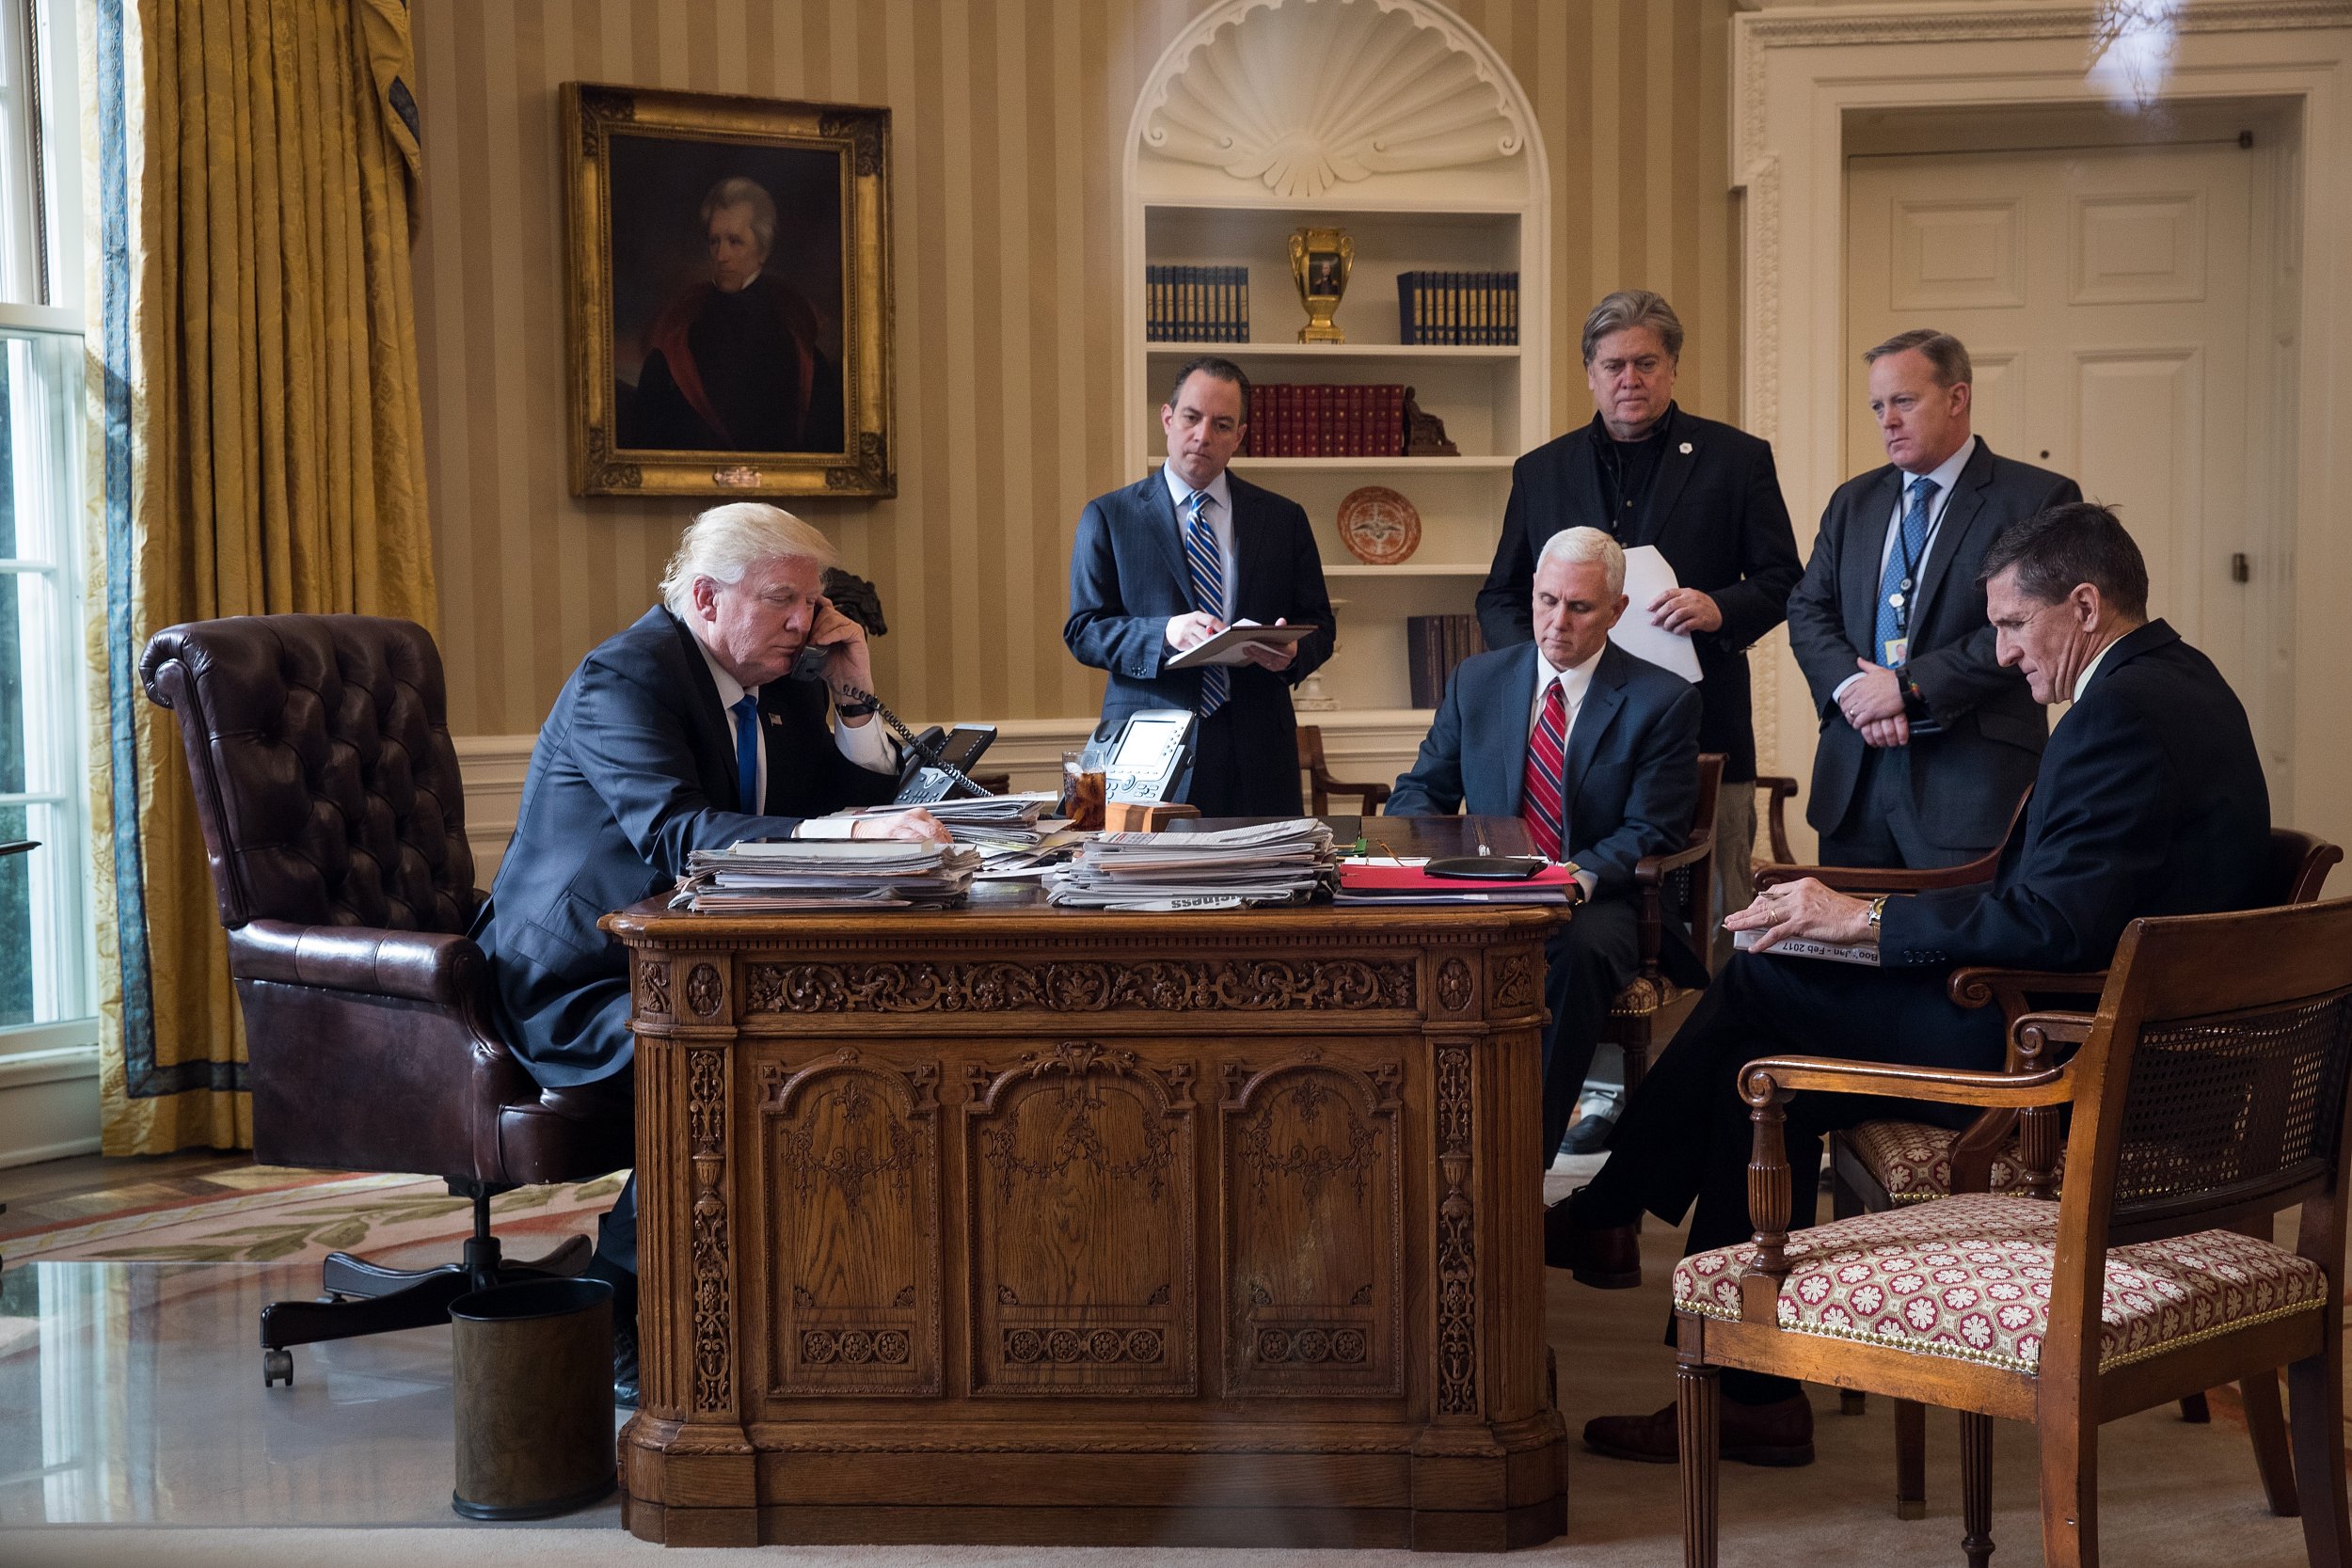 Donald Trump, Reince Priebus, Steve Bannon, Sean Spicer and Mike Flynn